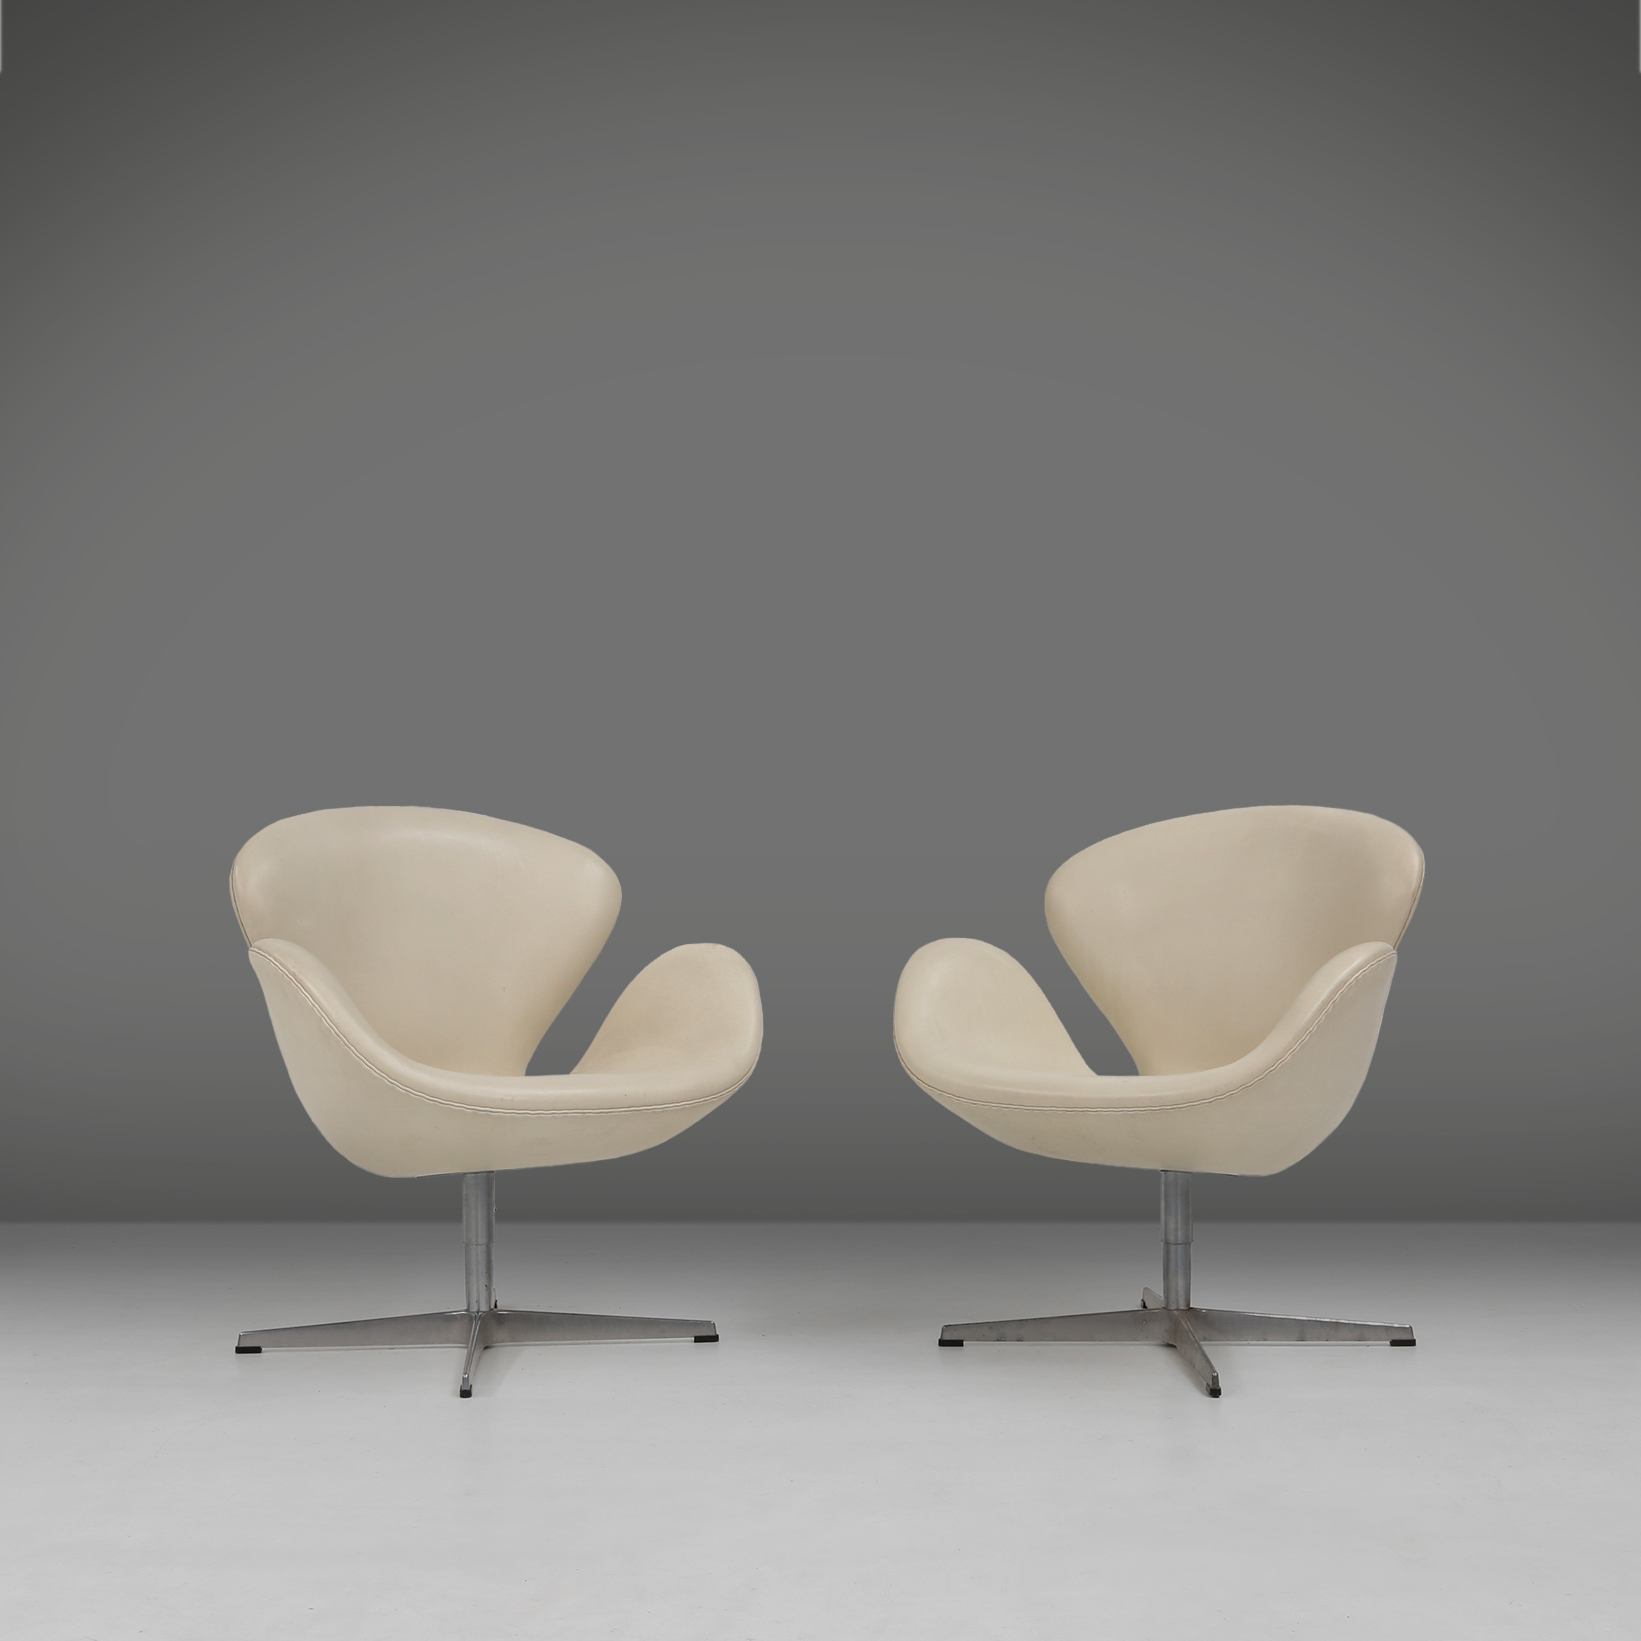 Set of two leather Swan chairs by Arne Jacobsen for Fritz Hansenthumbnail